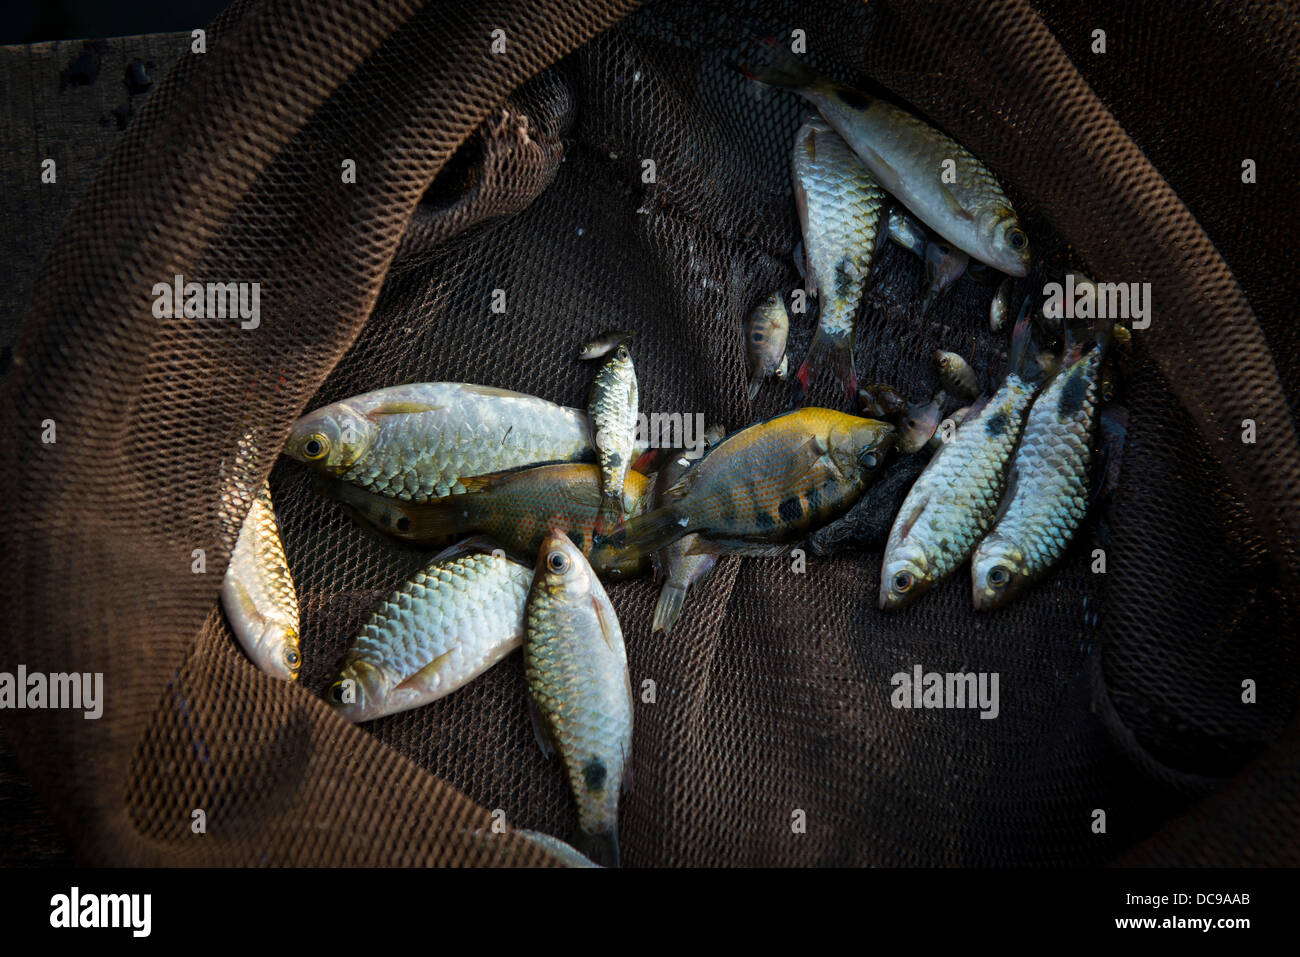 Small fish in a net Stock Photo